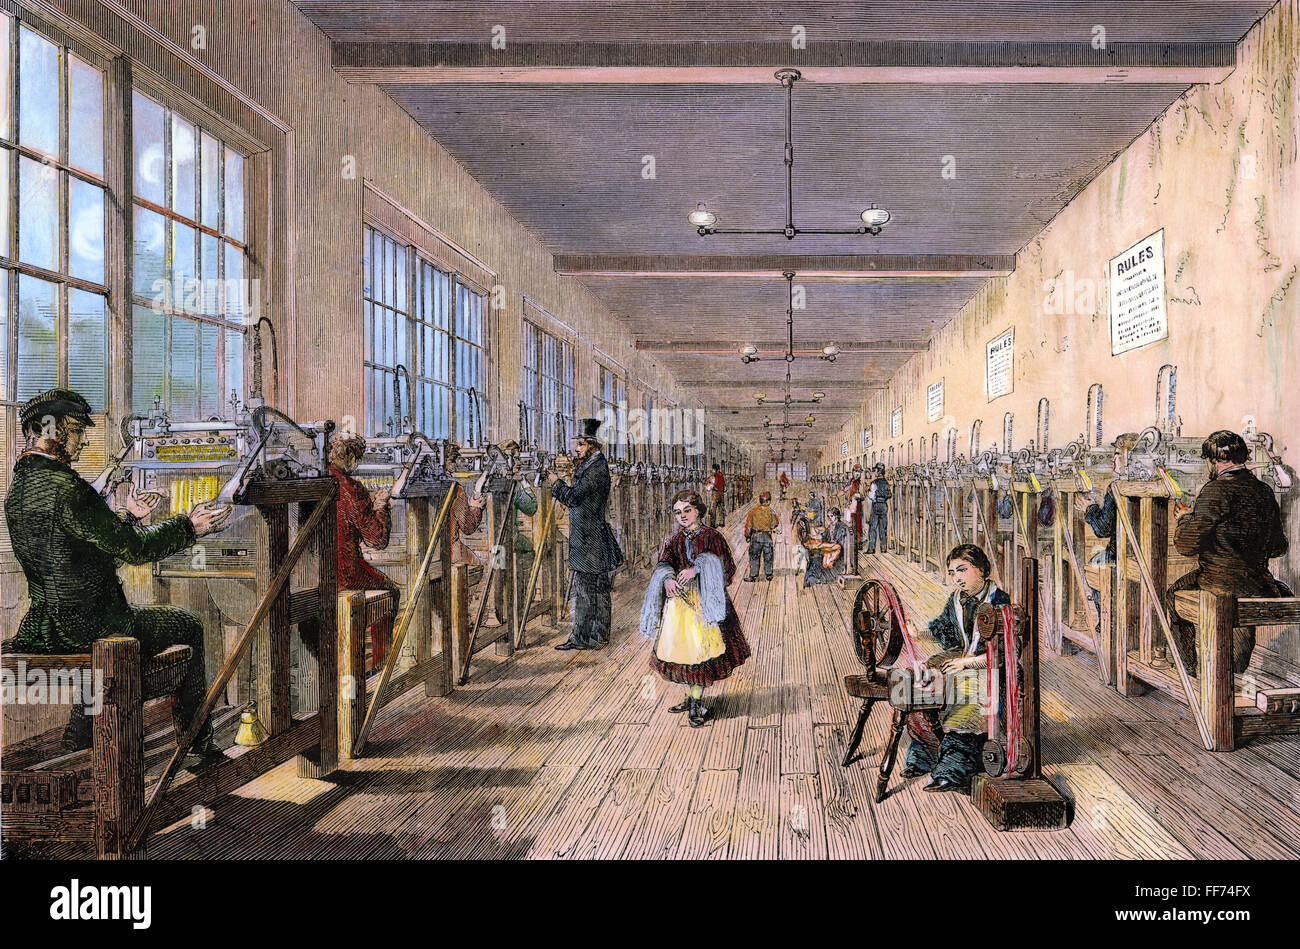 TEXTILE MILL, c1840. /nOne of Robert Owen's model textile mills at Tewkesbury, England, with work rules prominently displayed on the walls. Colored engraving, c1840. Stock Photo